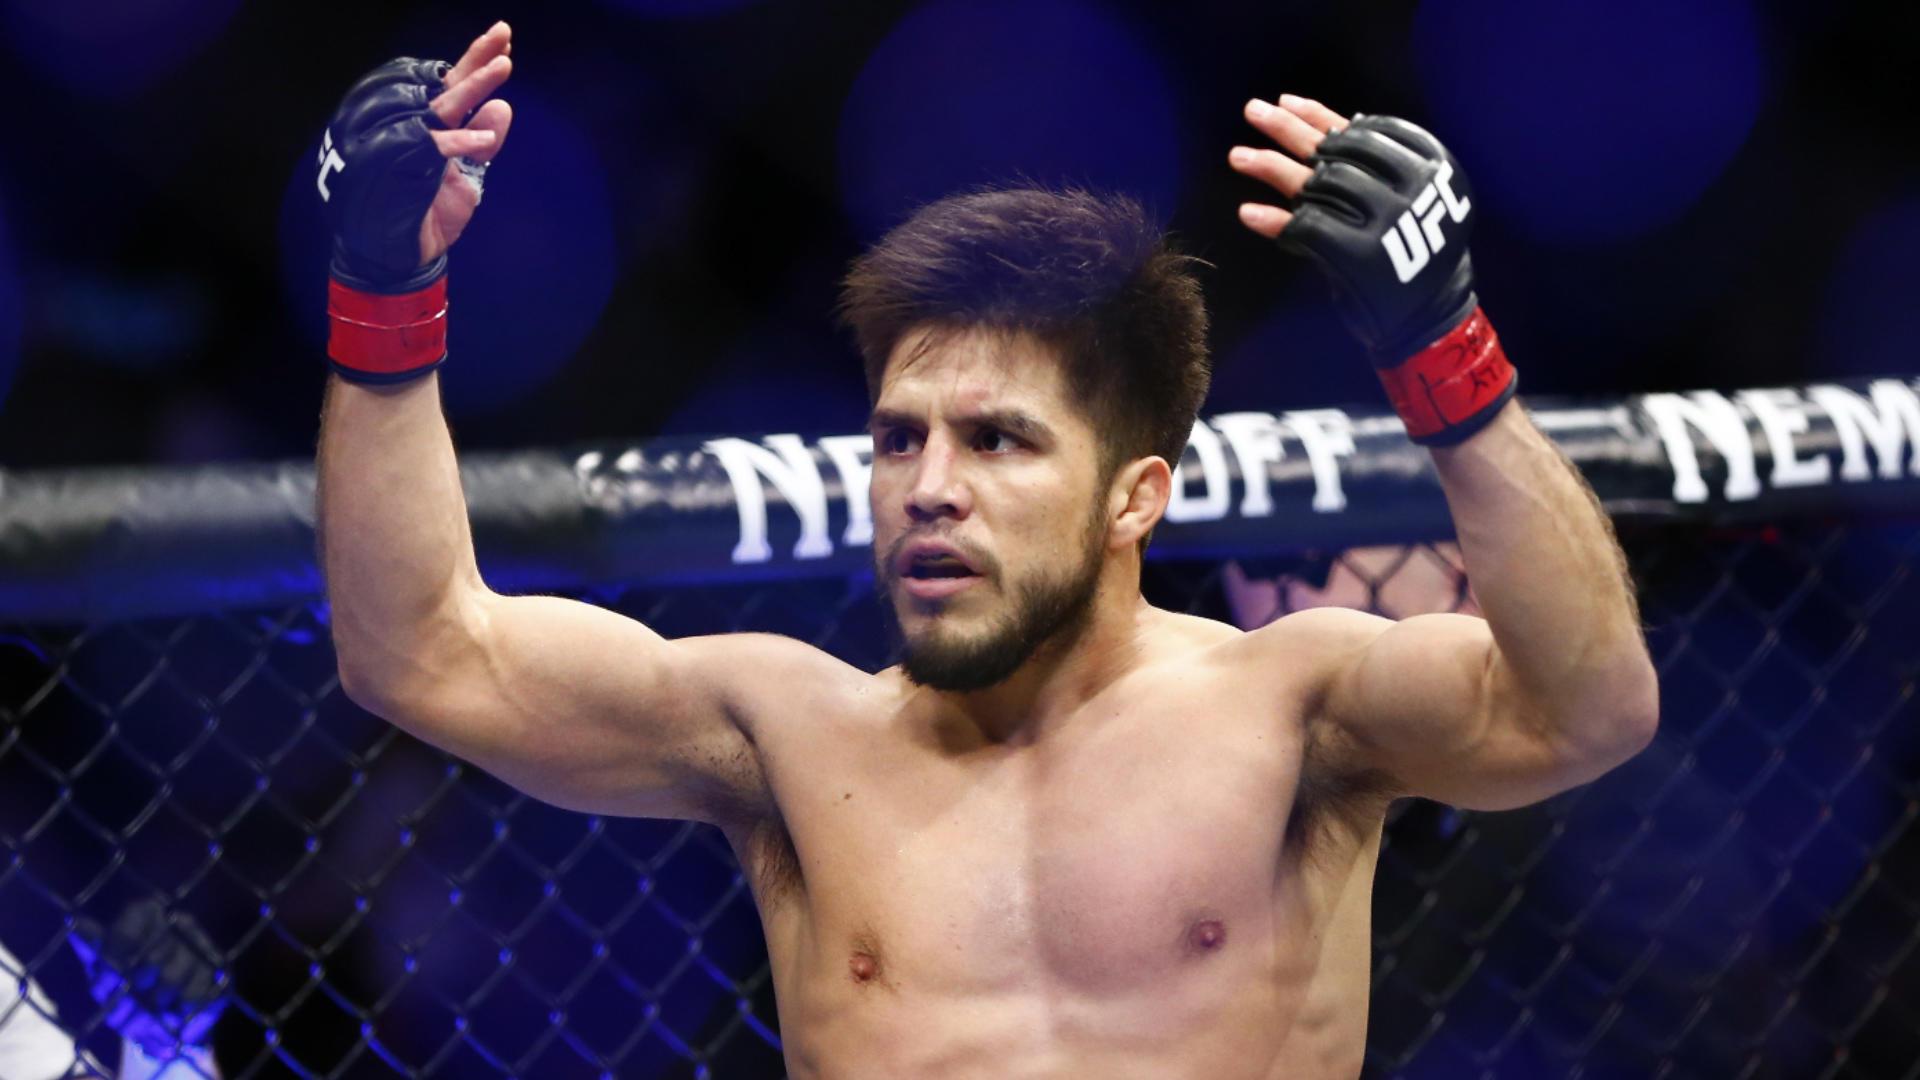 Henry Cejudo and Marlon Moraes to fight in UFC 238